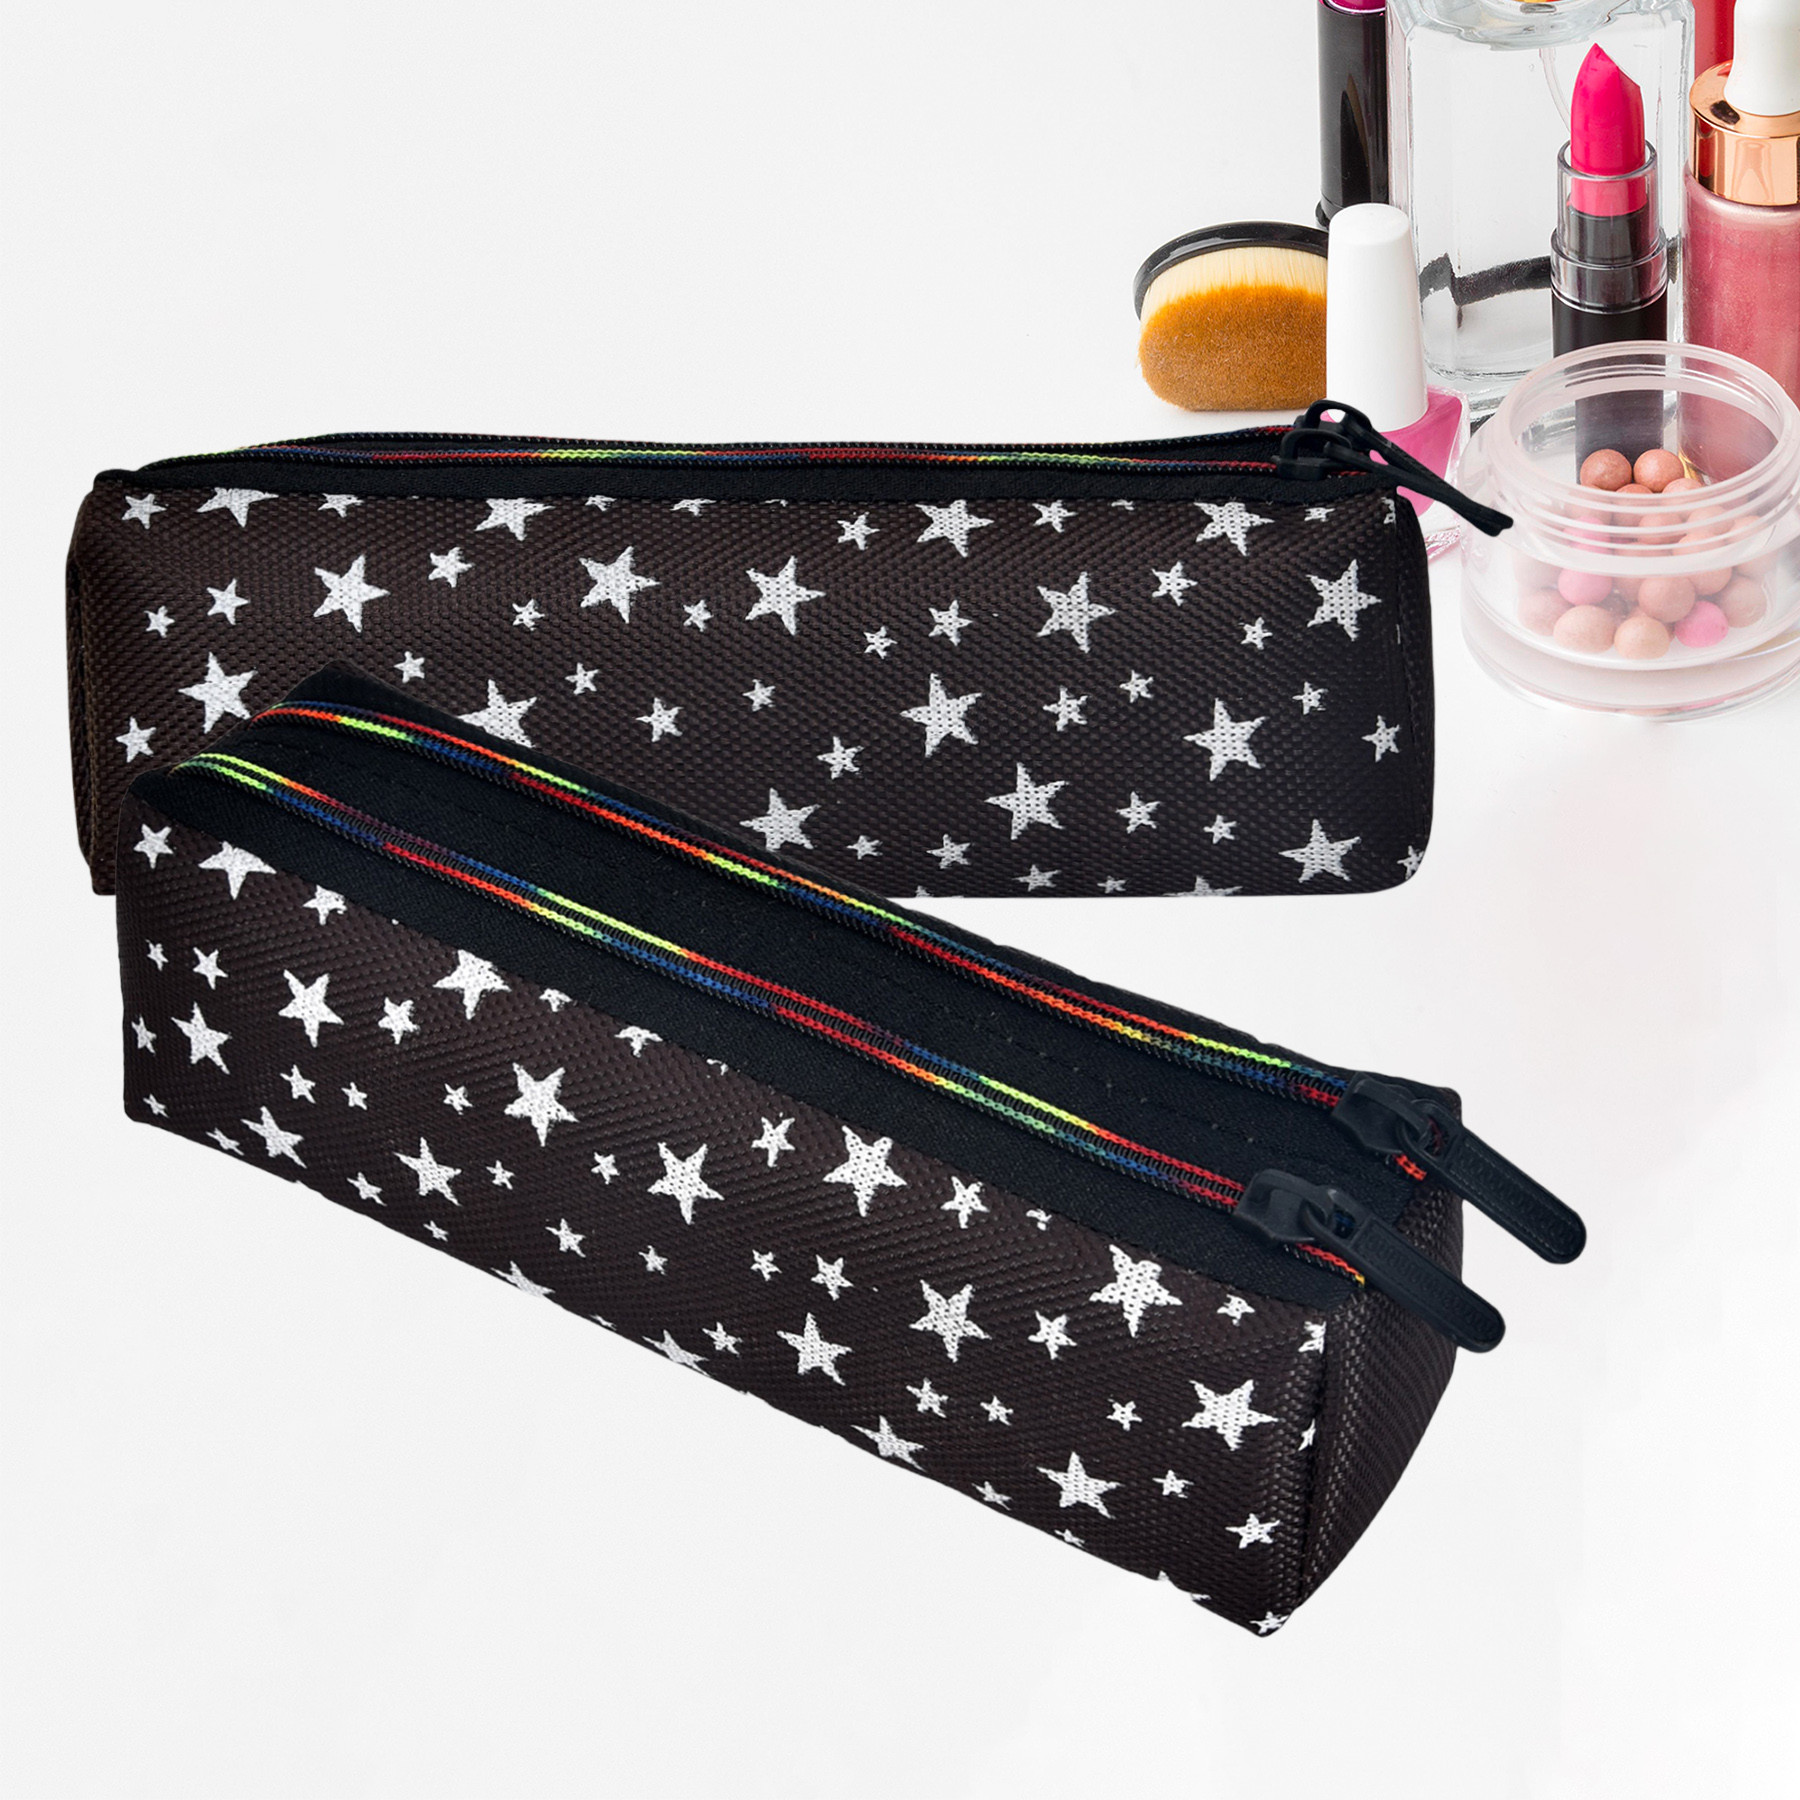 Kuber Industries Makeup Pouch | Rexine Cosmetic Pouch | Jewellery Utility Pouch | Toiletry Pouch for Girls | Travel Makeup Pouch for Girls | Storage Makeup Bag | Star Makeup Pouch |Black